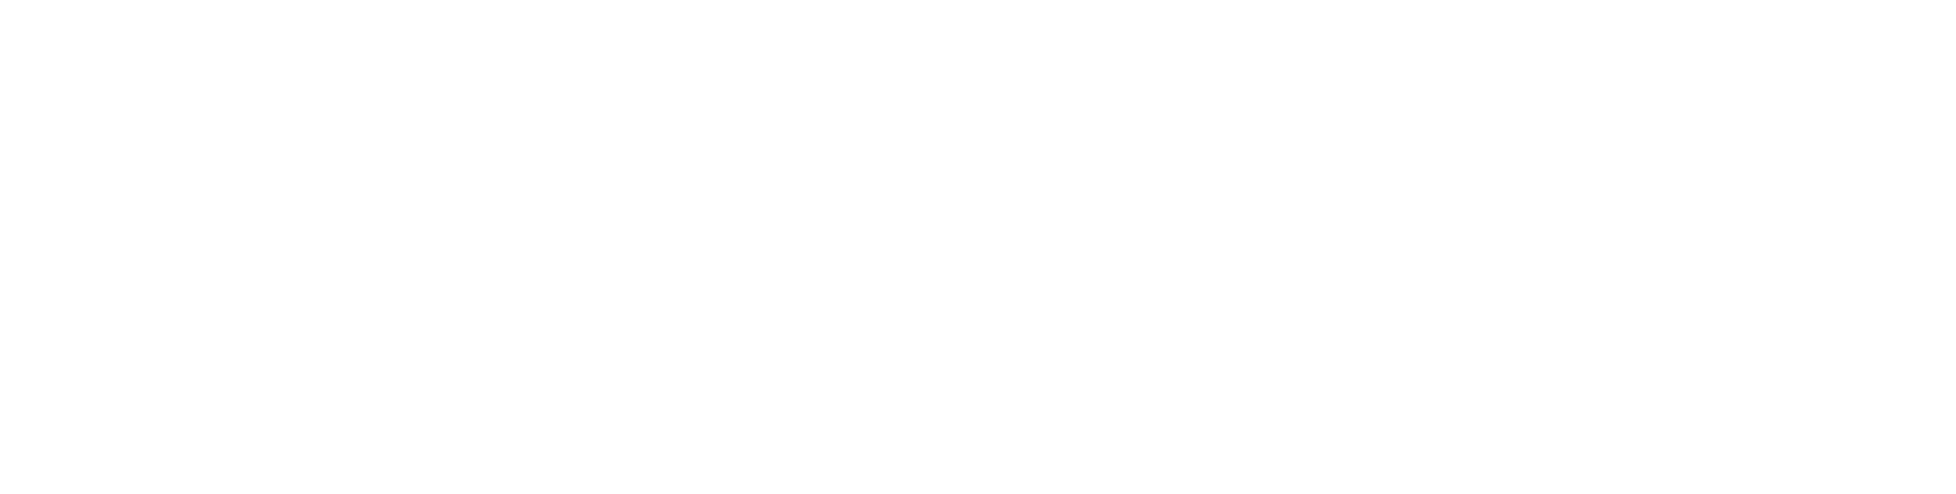 The Corcoran logo features the word 'Corcoran' in a distinct font style, accompanied by a straight line underneath.